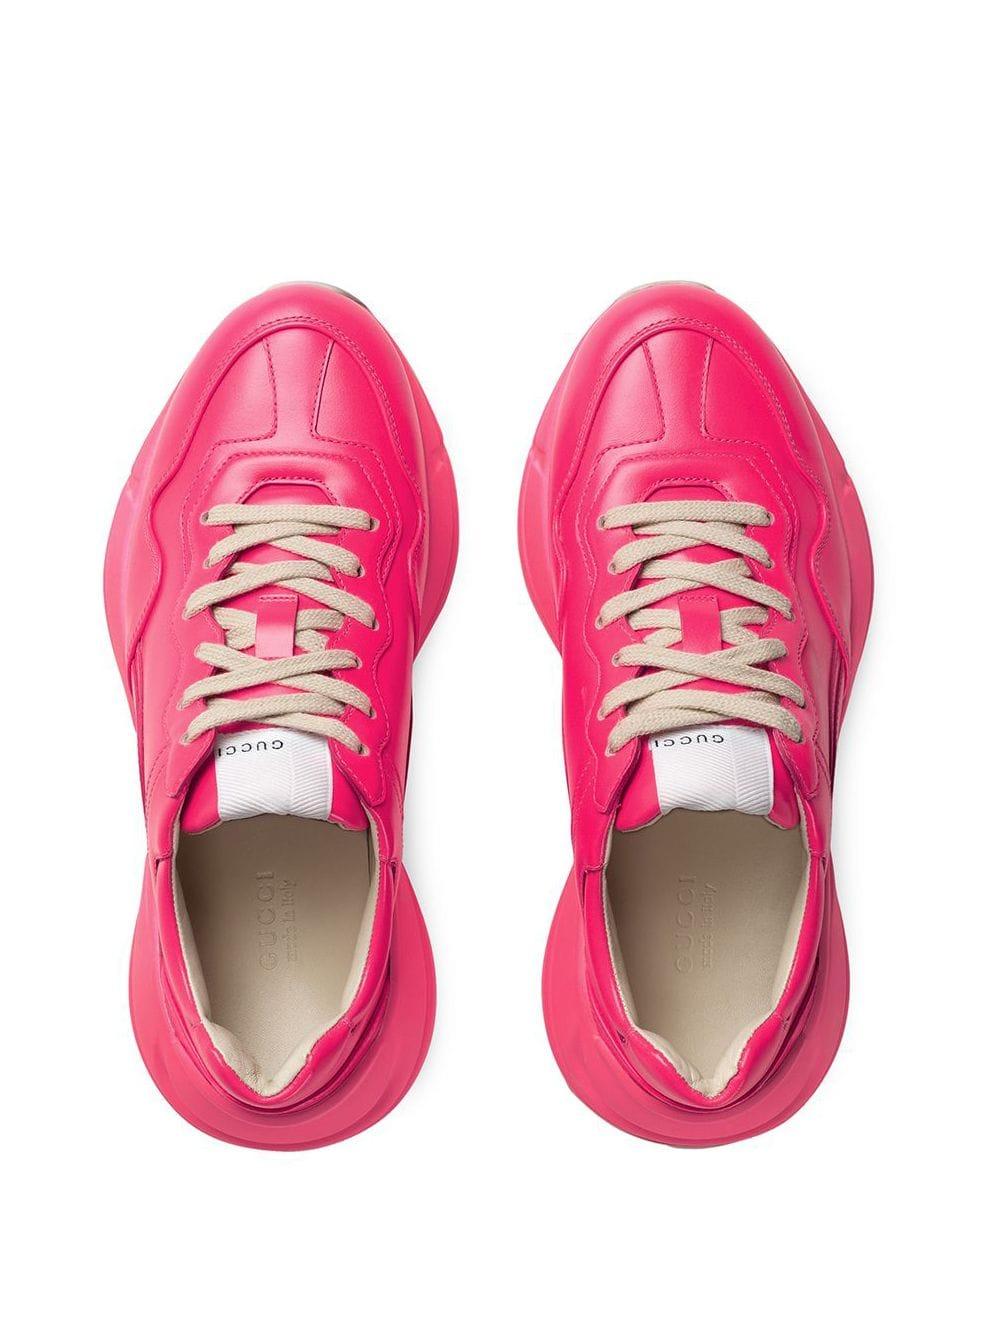 Gucci Rhyton Fluorescent Leather Sneaker in Pink | Lyst